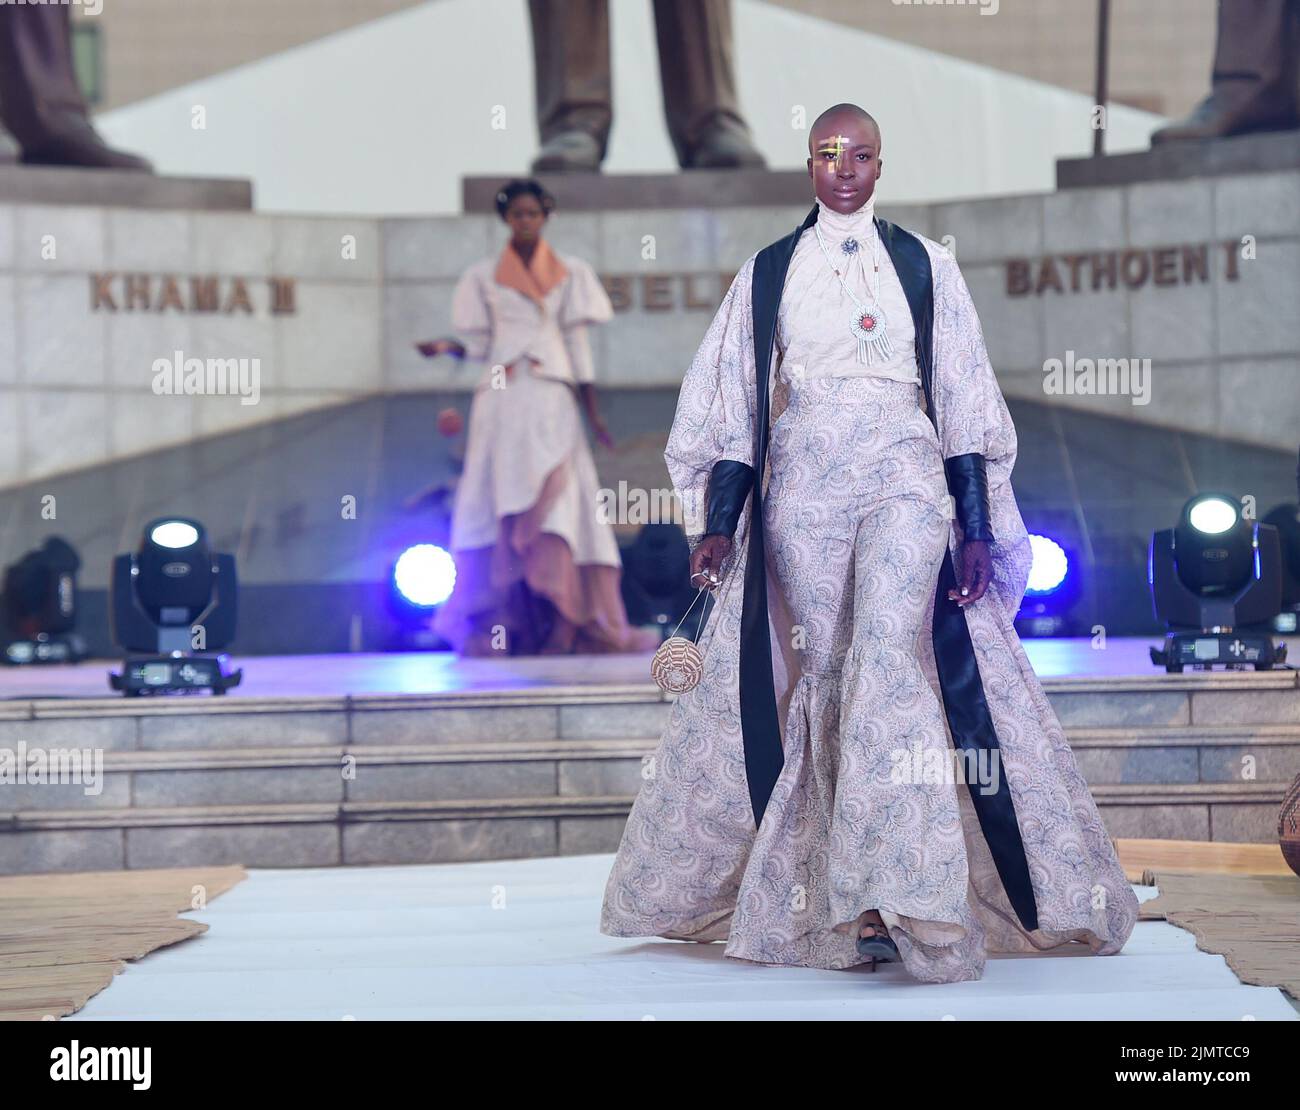 Gaborone, Botswana. 6th Aug, 2022. A model presents a creation during a fashion show in Gaborone, Botswana, on Aug. 6, 2022. The fashion show was held to commemorate the 28th anniversary of the establishment of diplomatic relations between Botswana and South Africa. Credit: Tshekiso Tebalo/Xinhua/Alamy Live News Stock Photo